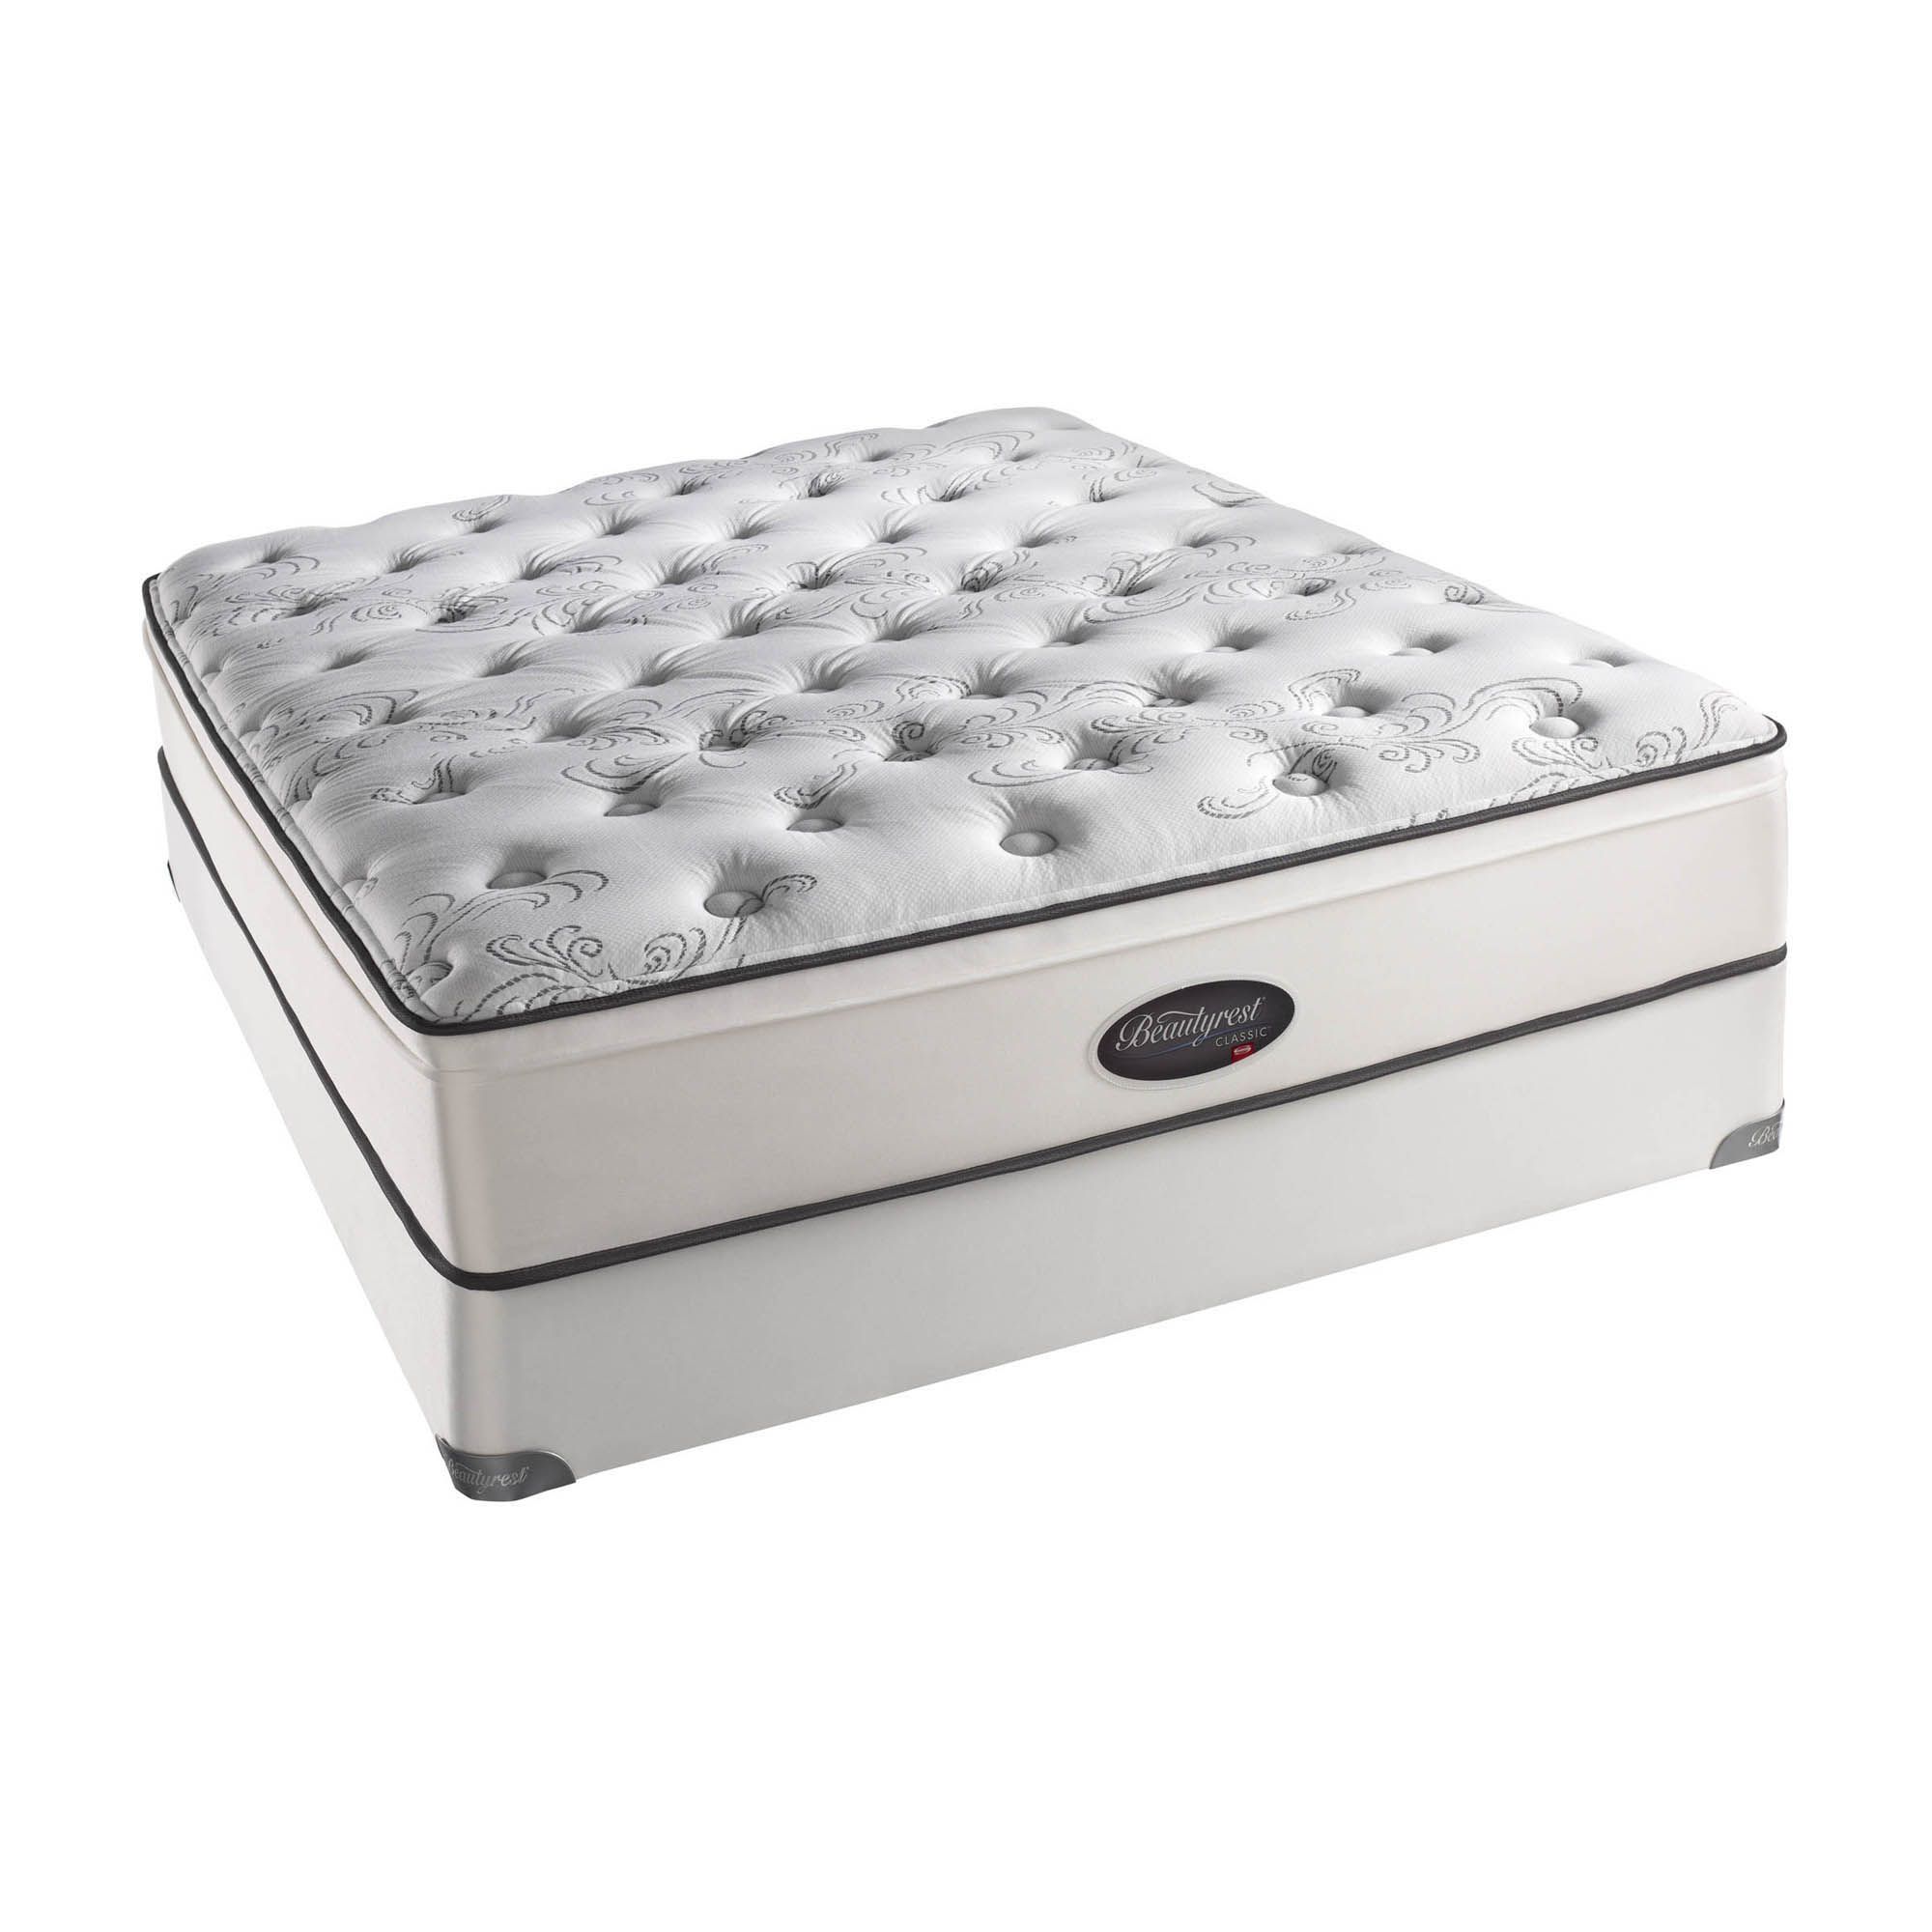 Beautyrest CLOSEOUT WHILE SUPPLIES LAST - Grace Bay Plush Firm Queen Mattress Only